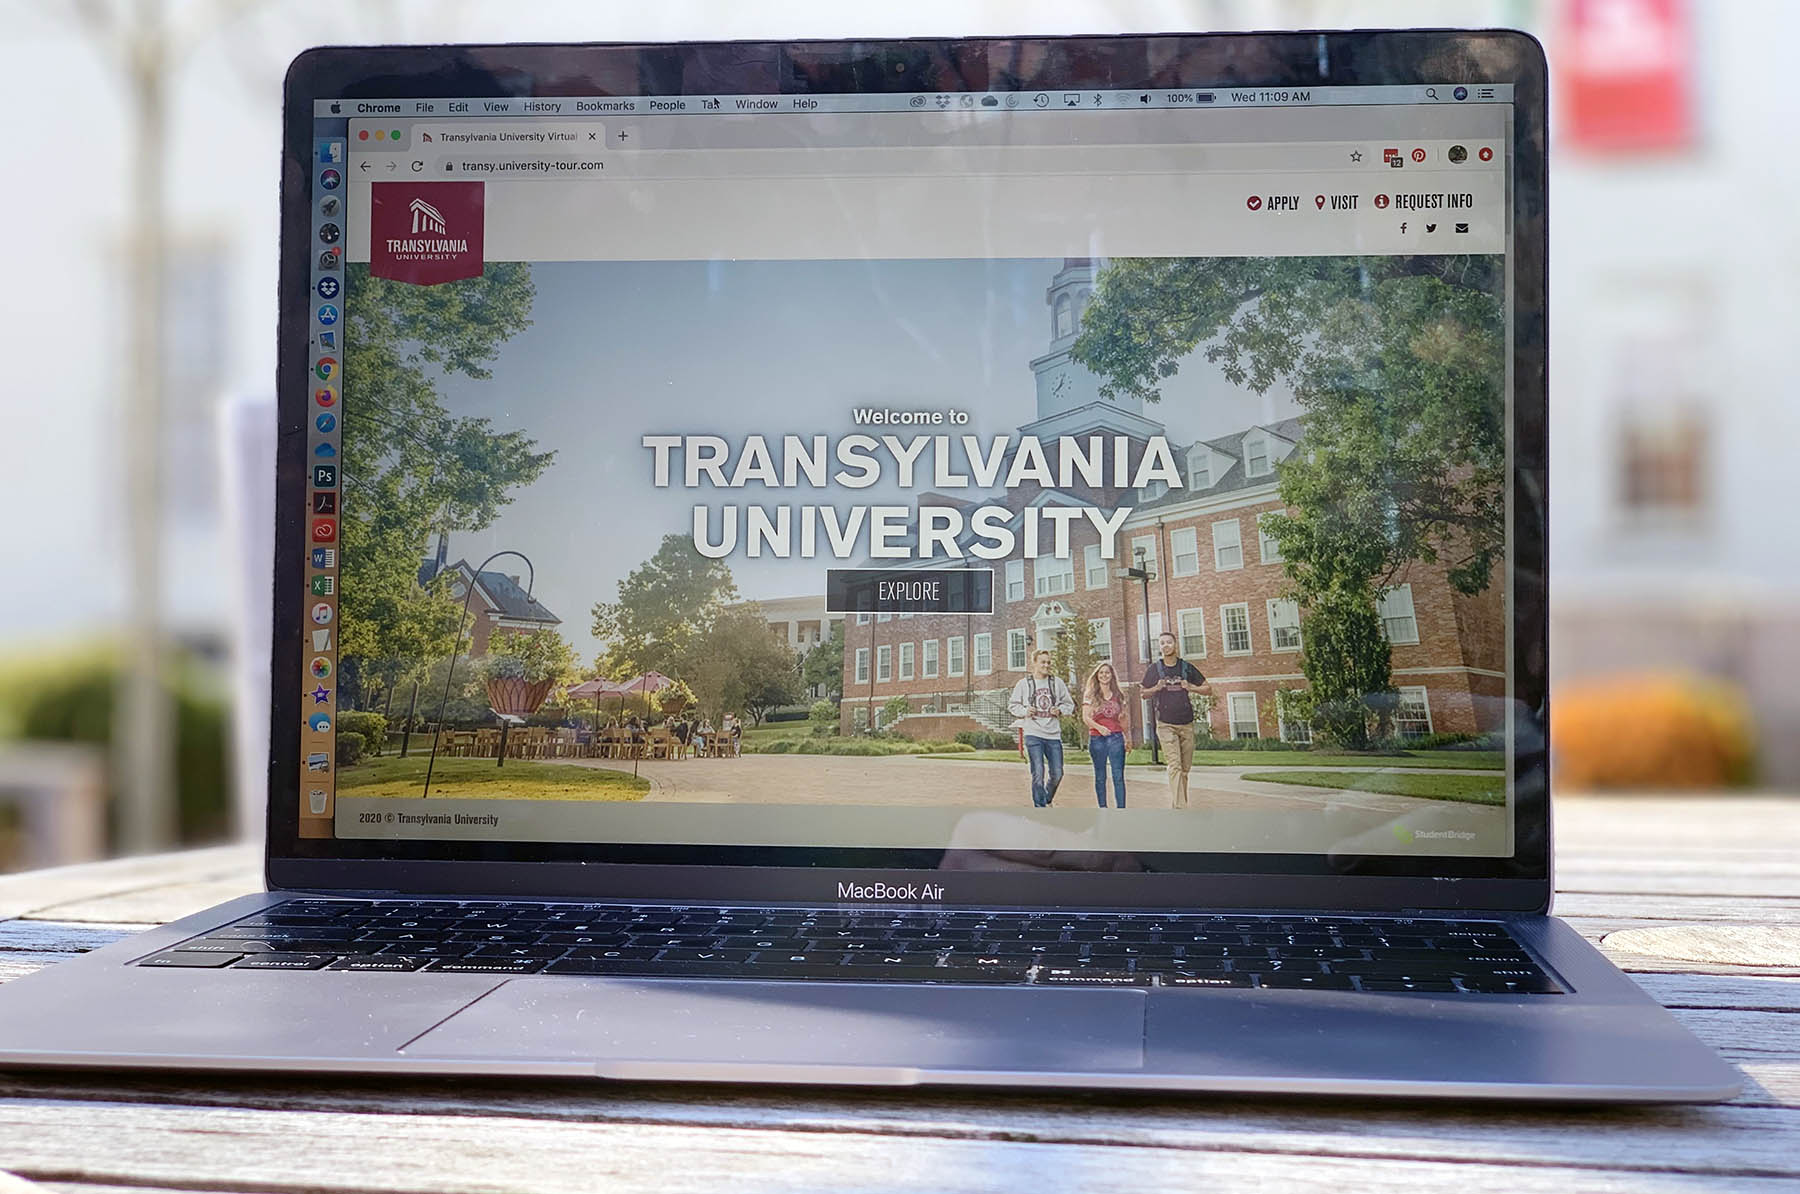 Transylvania video tour gives prospective students path to explore campus online